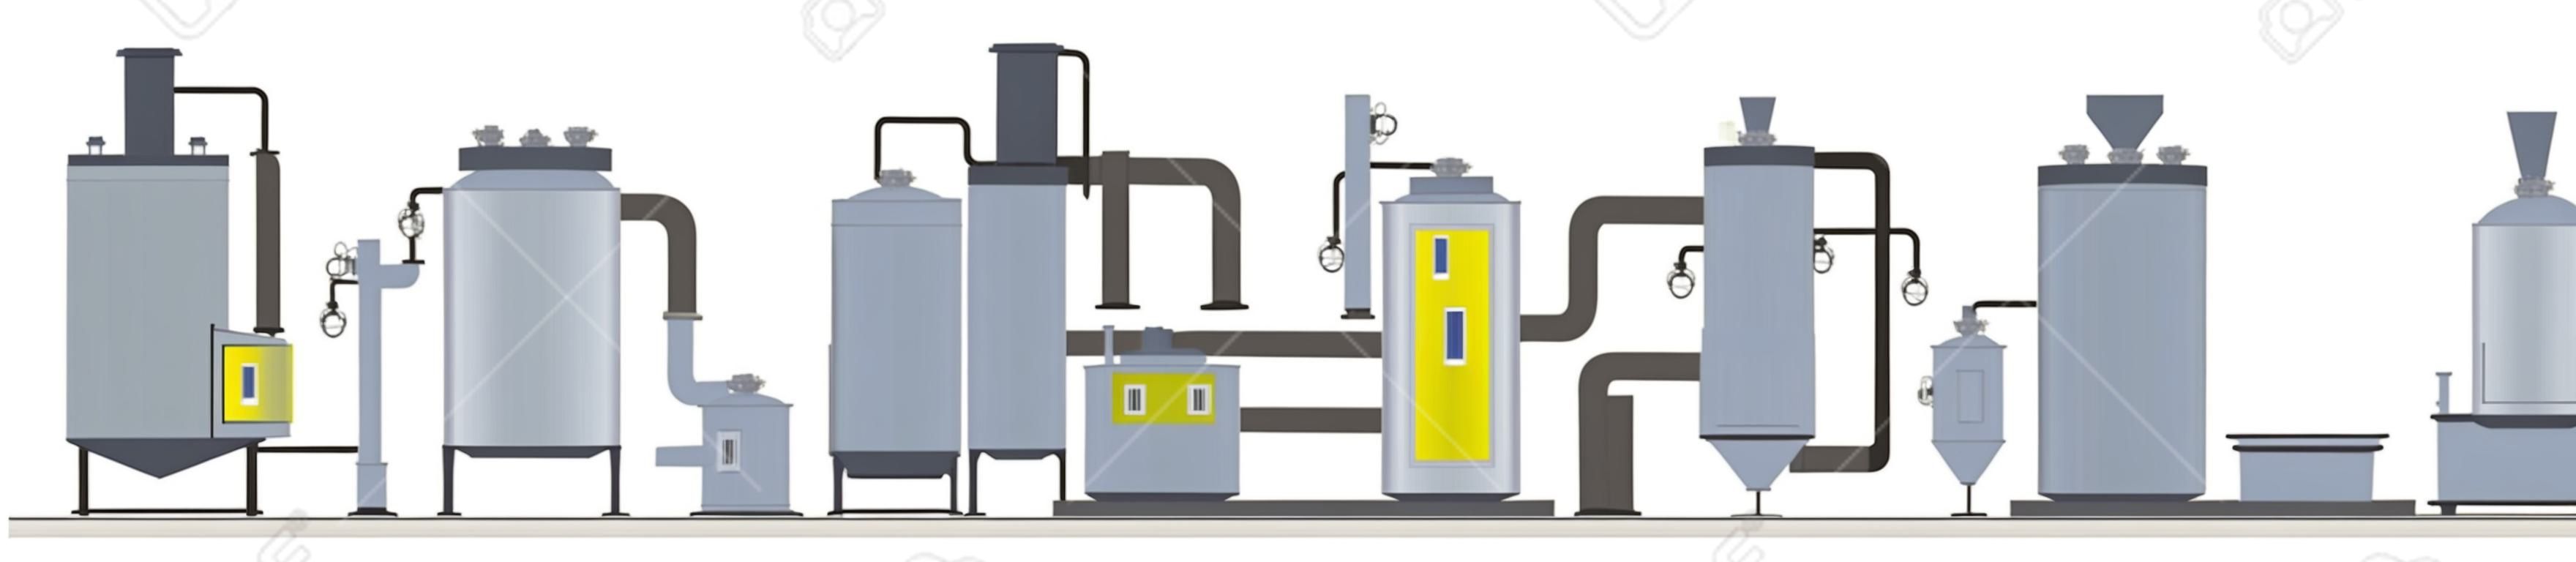 Olive oil production or manufacture process stages. Washing, pressing, filtrating and packaging bottles with organic oil. Isolated vector flat illustration